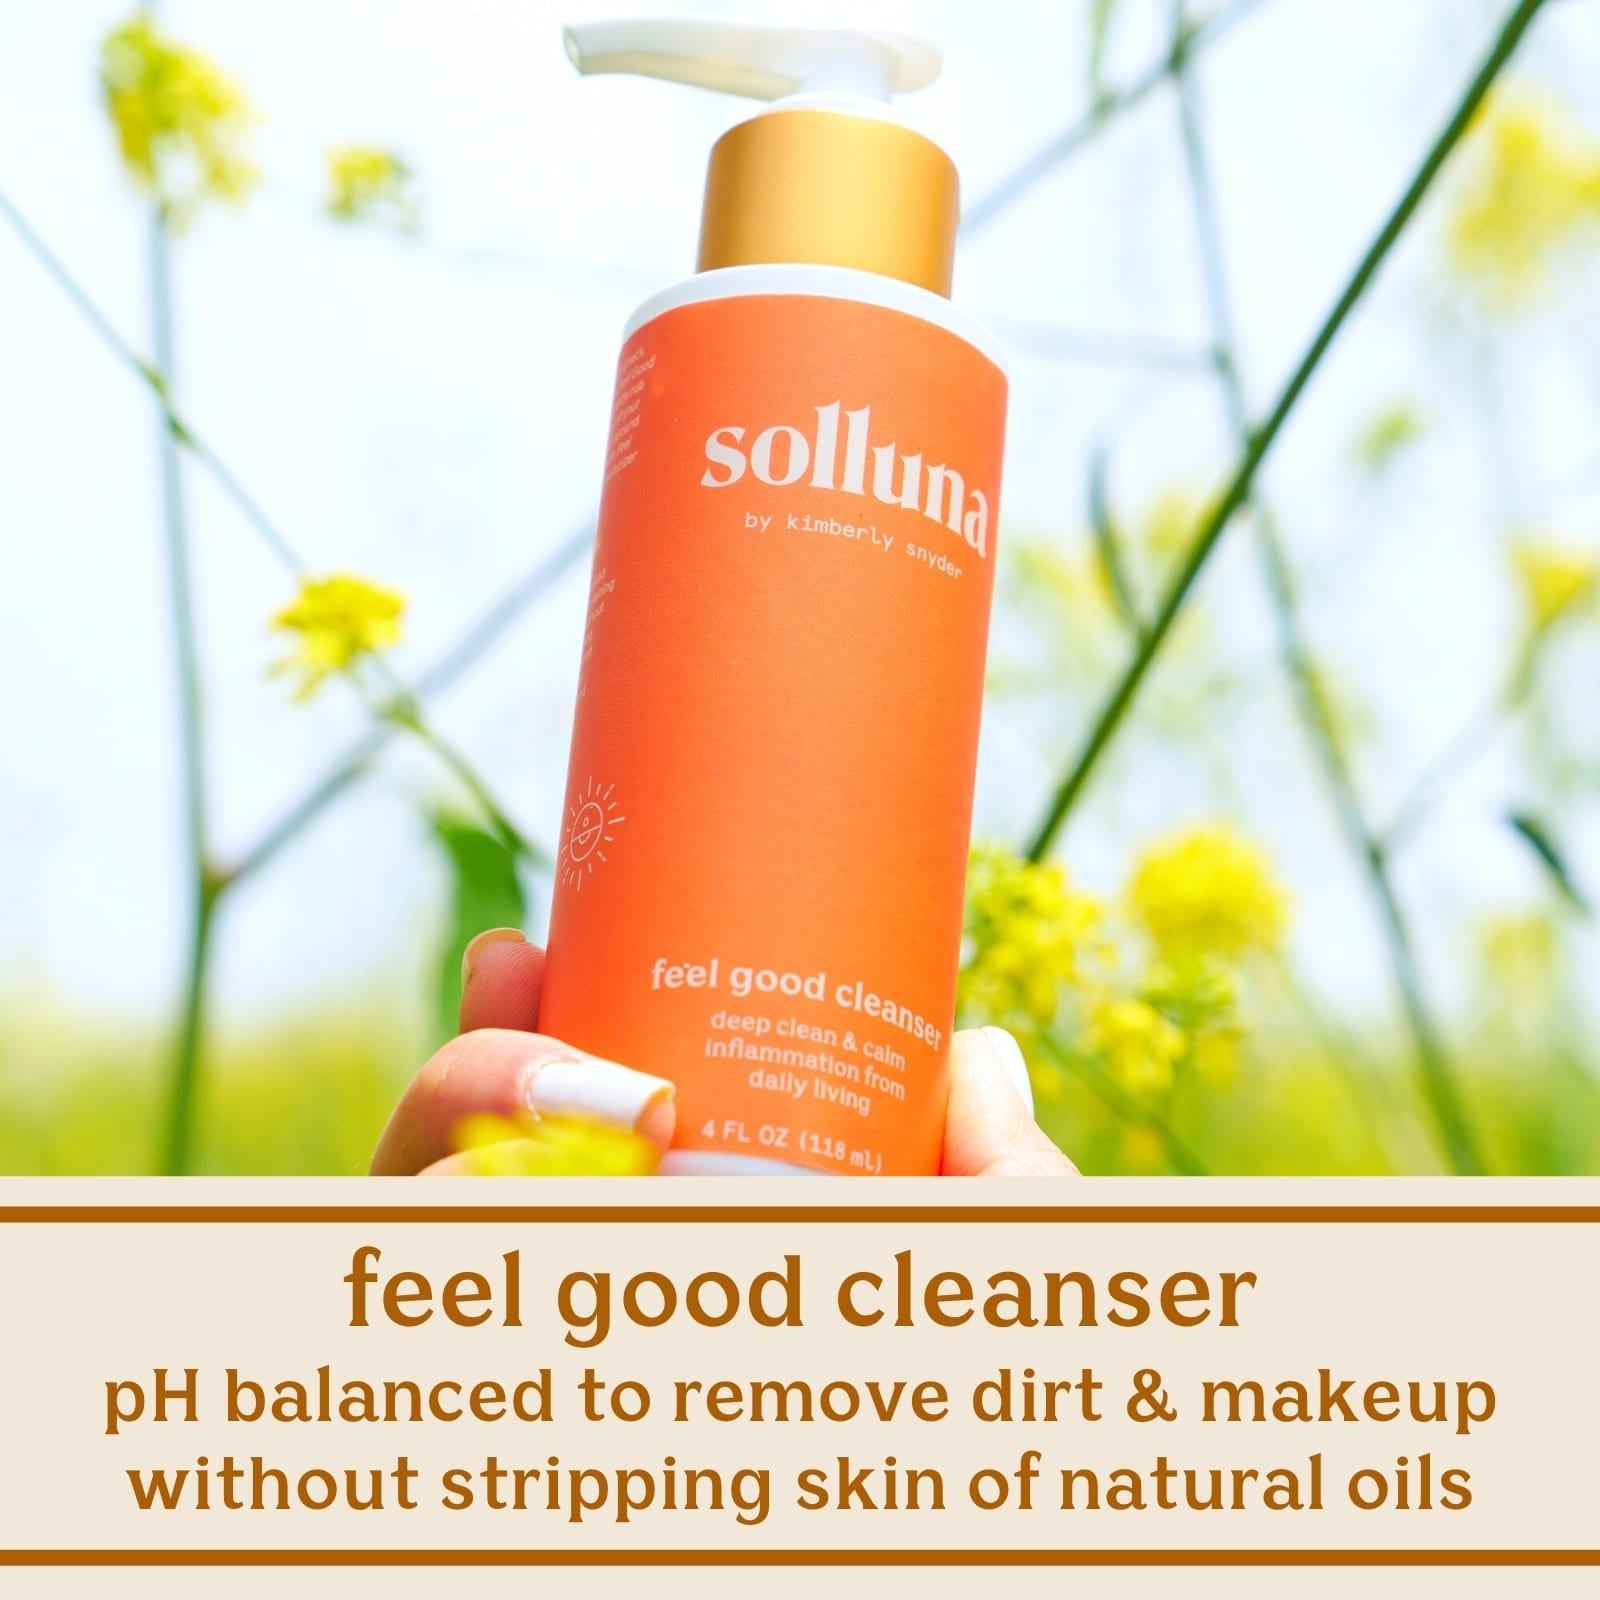 Solluna's Feel Good Cleanser with pH Balanced to Remove Dirt & Makeup without Stripping Skin of Natural Oils